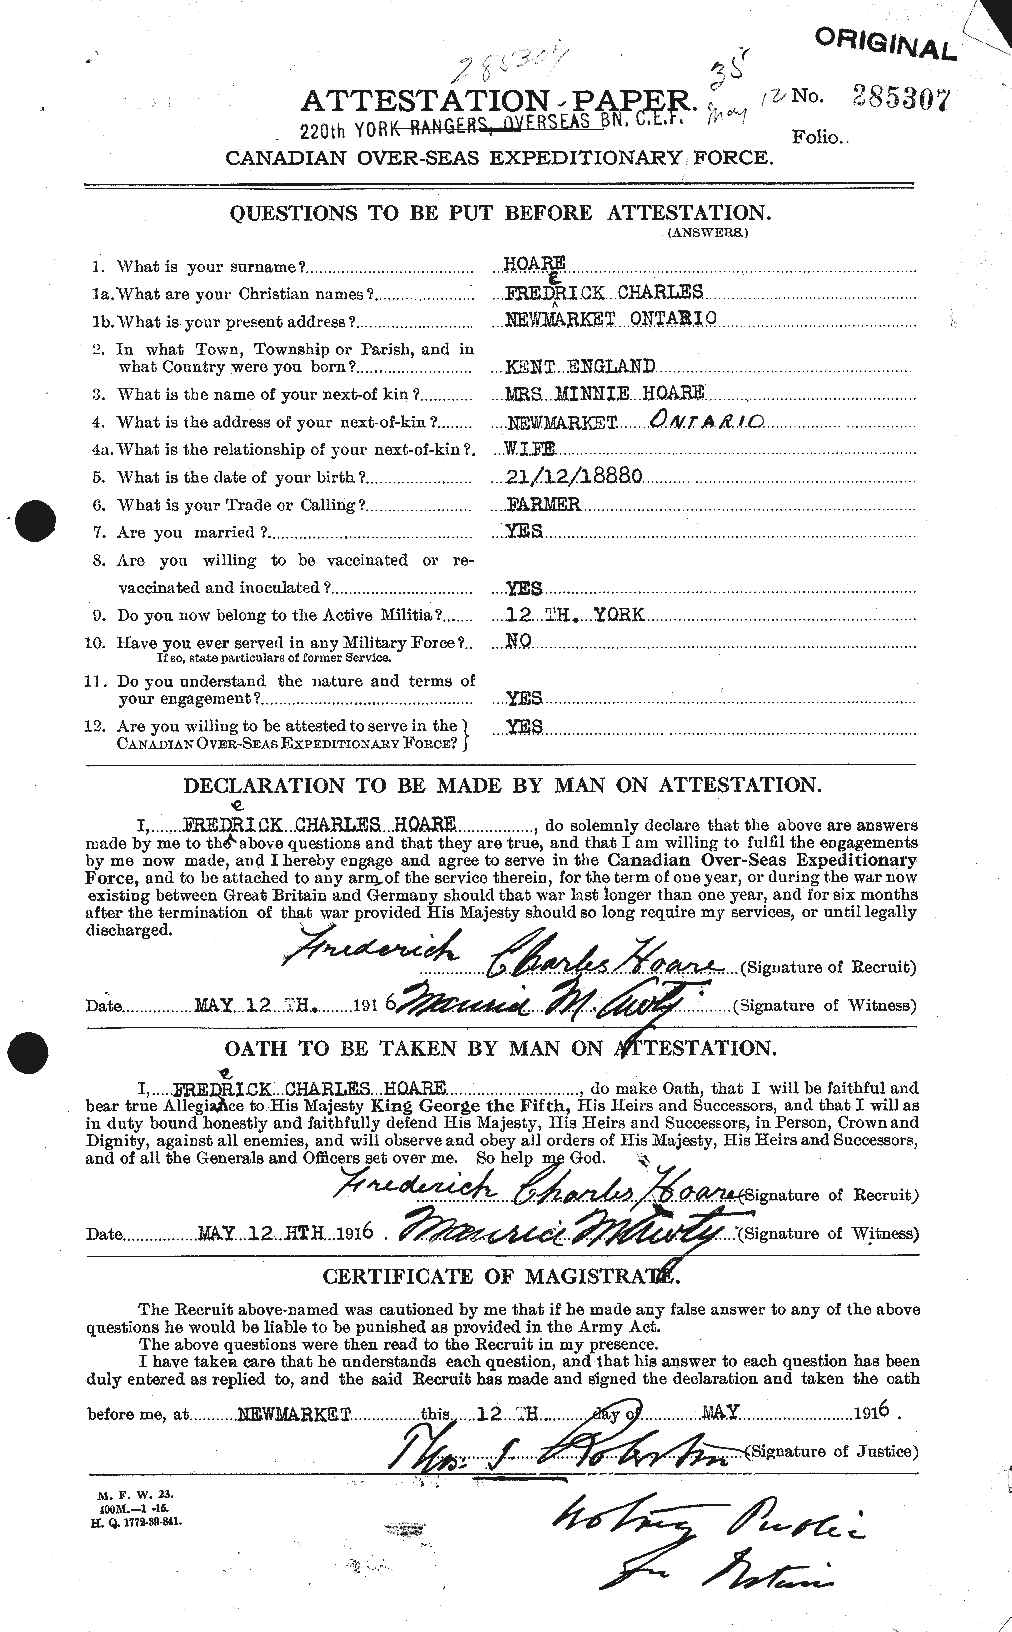 Personnel Records of the First World War - CEF 394828a